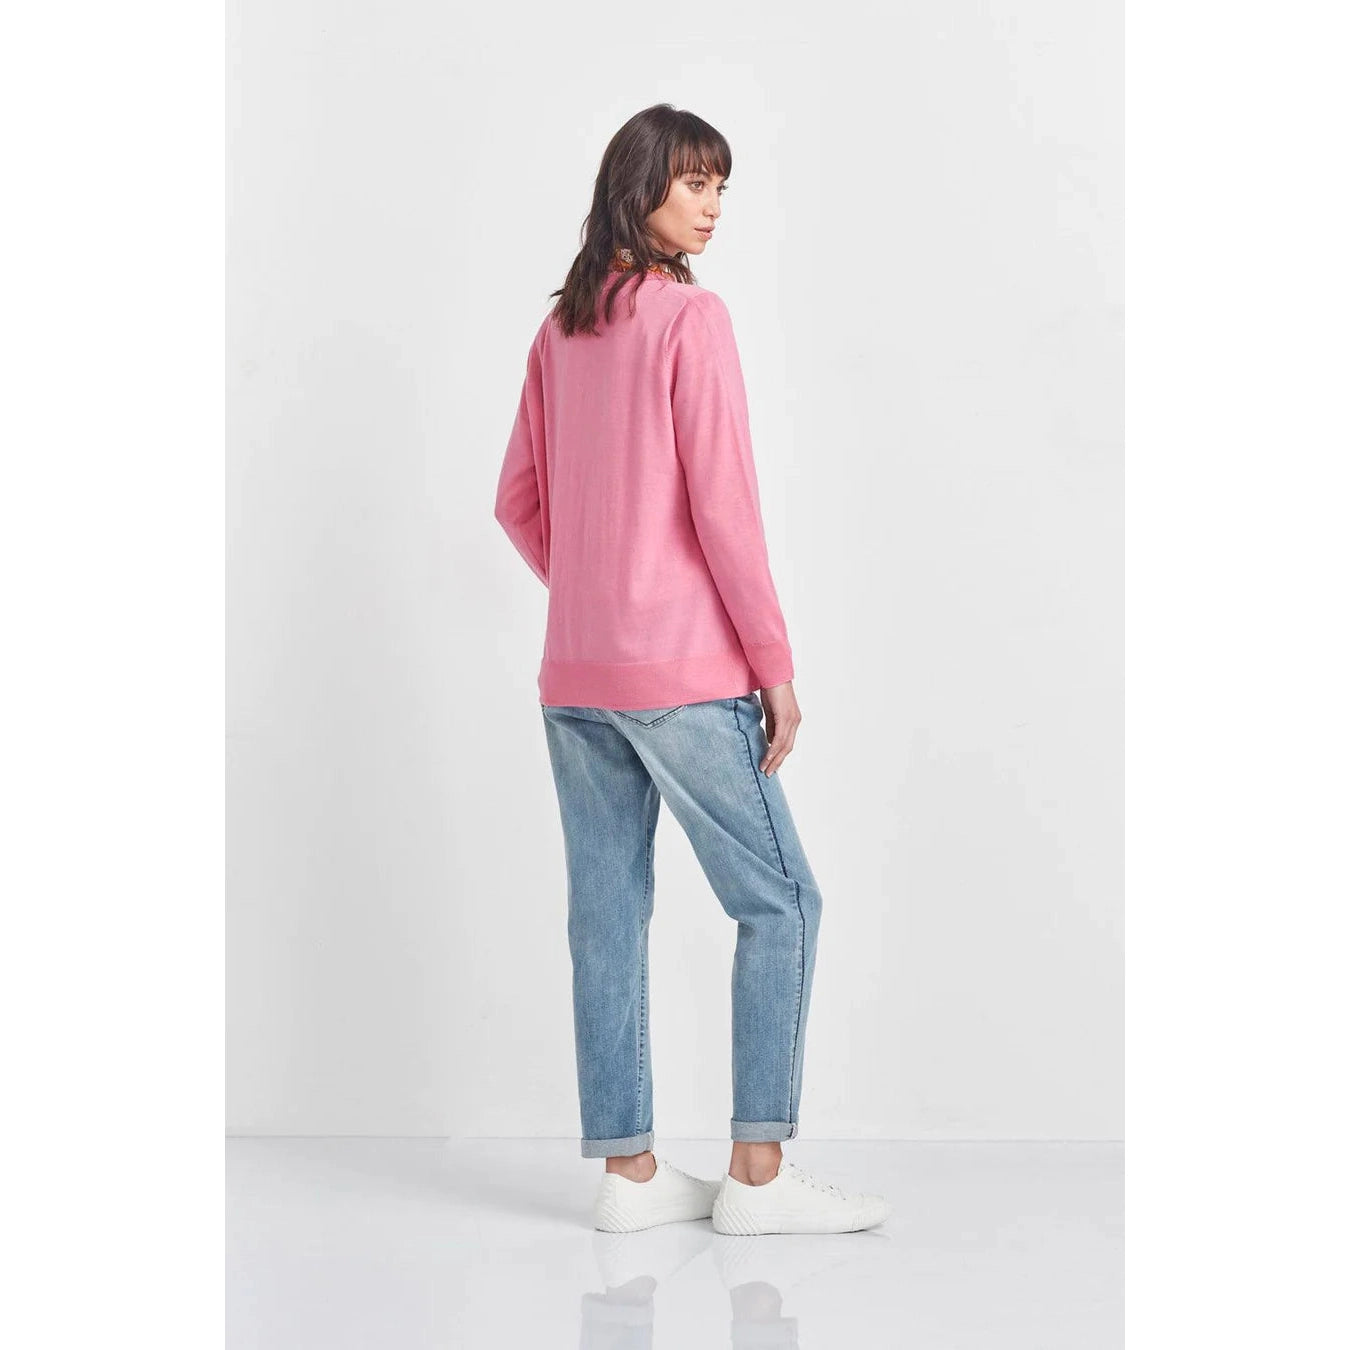 Verge Network Sweater - Pink Panther